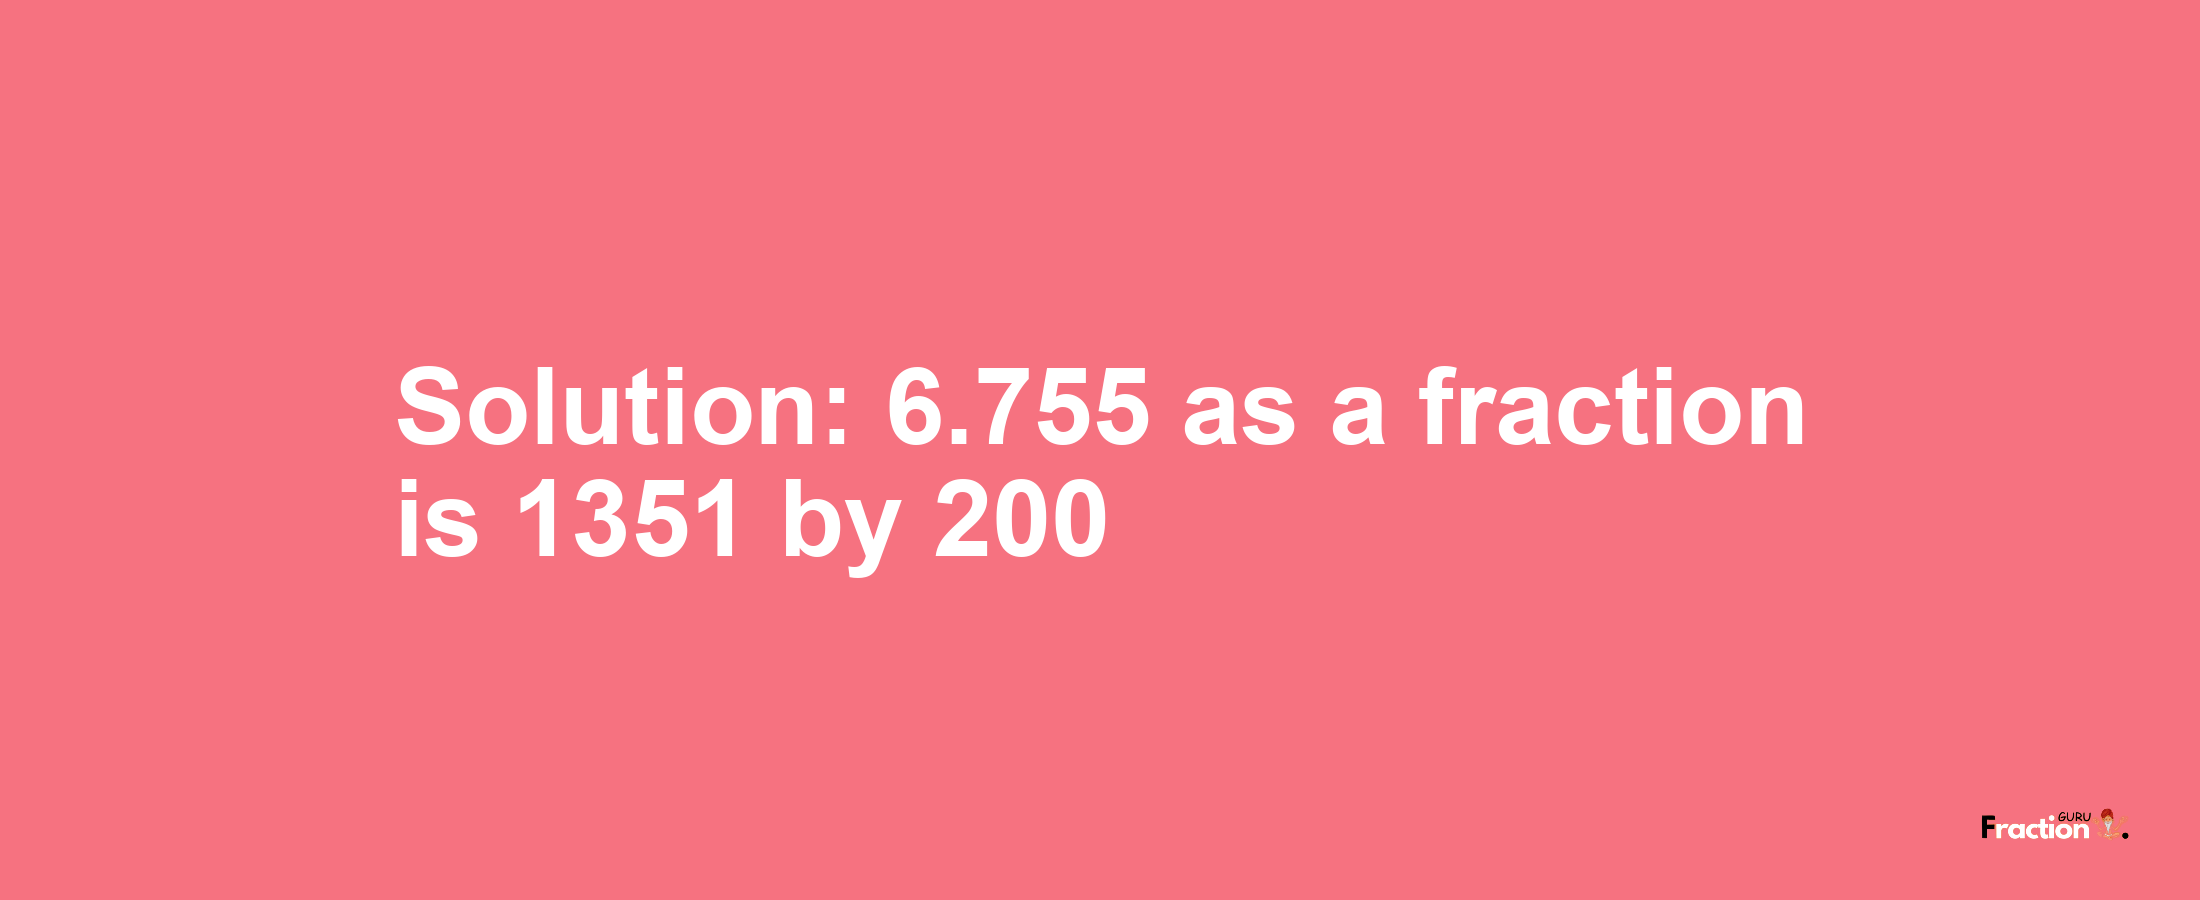 Solution:6.755 as a fraction is 1351/200